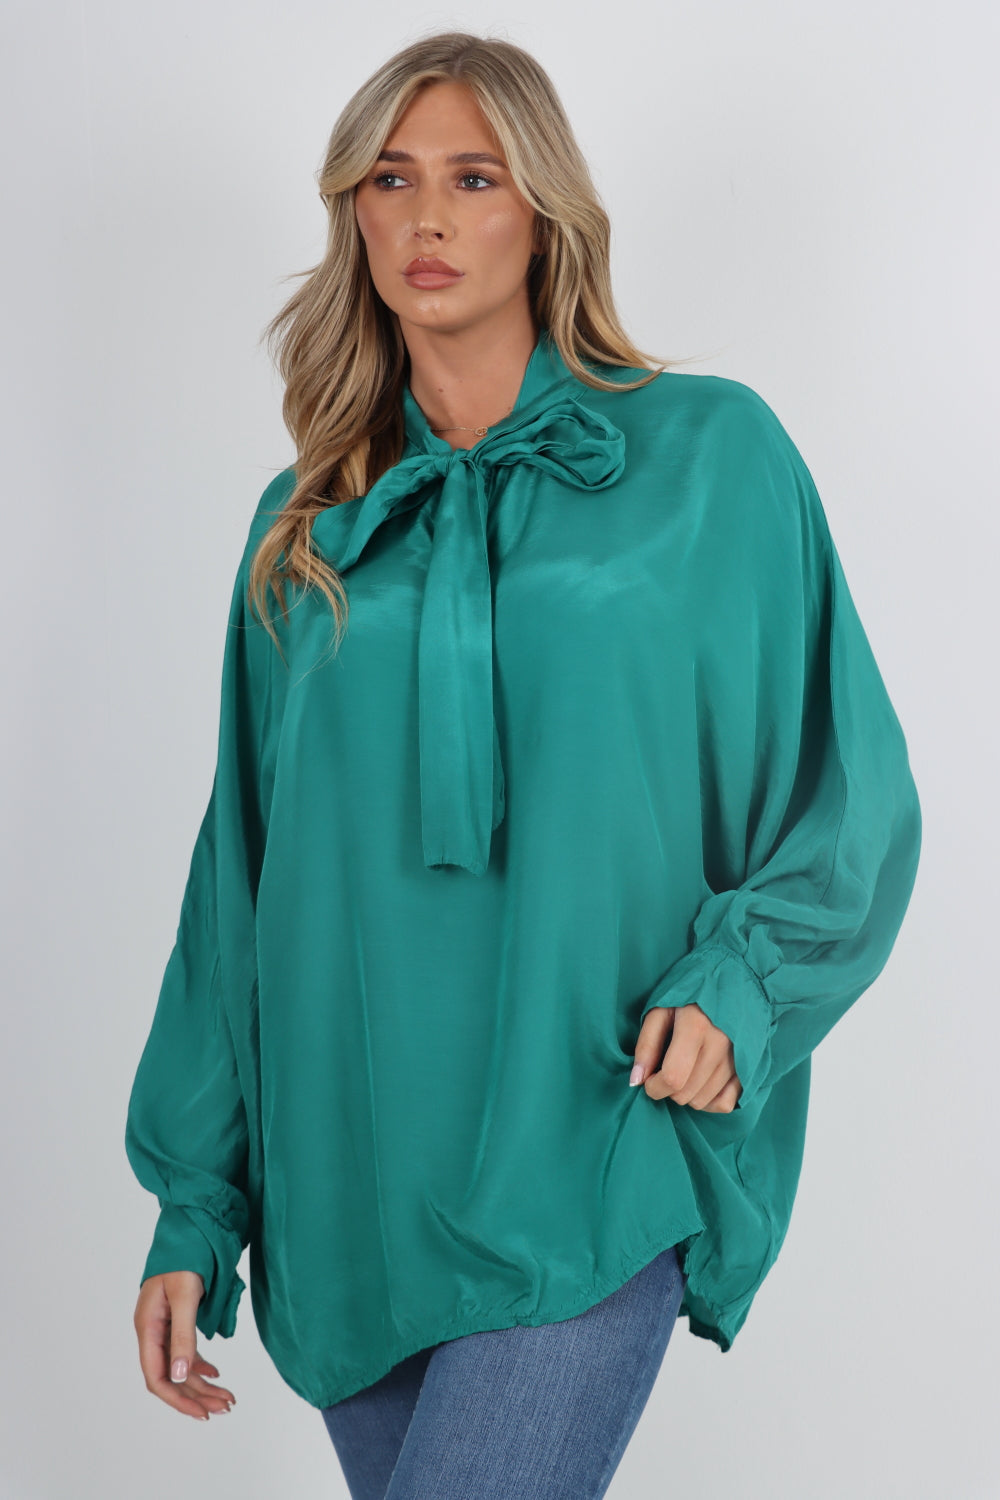 Made In Italy Oversized Bow Tie Tunic